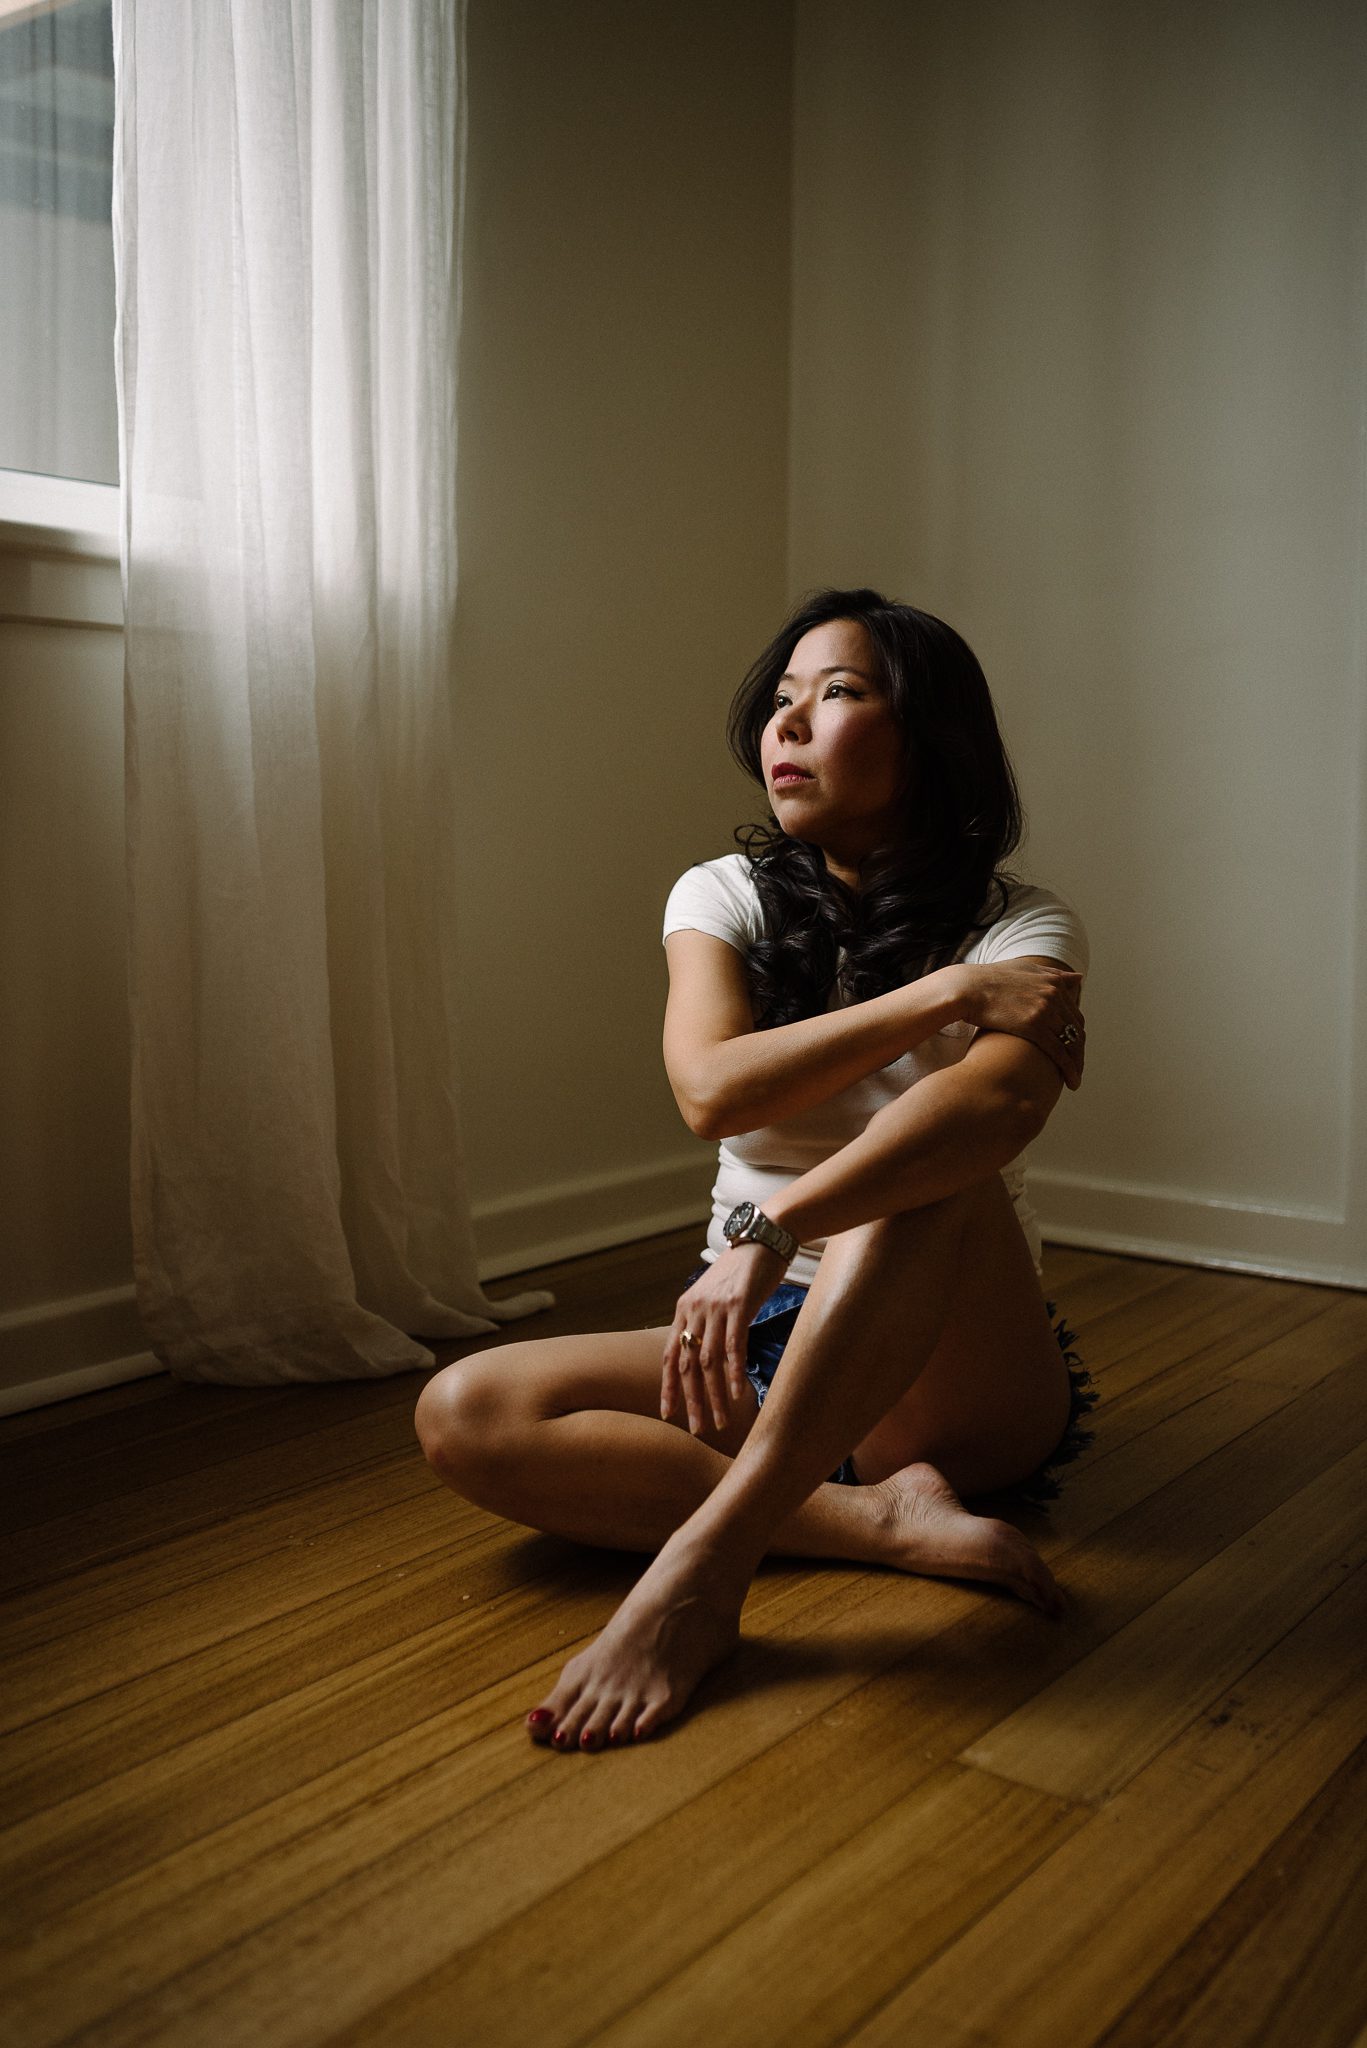 A lady sitting on the floor with her arms crossed, the light is hitting her face and the side of her body - taken during a boudoir shoot.